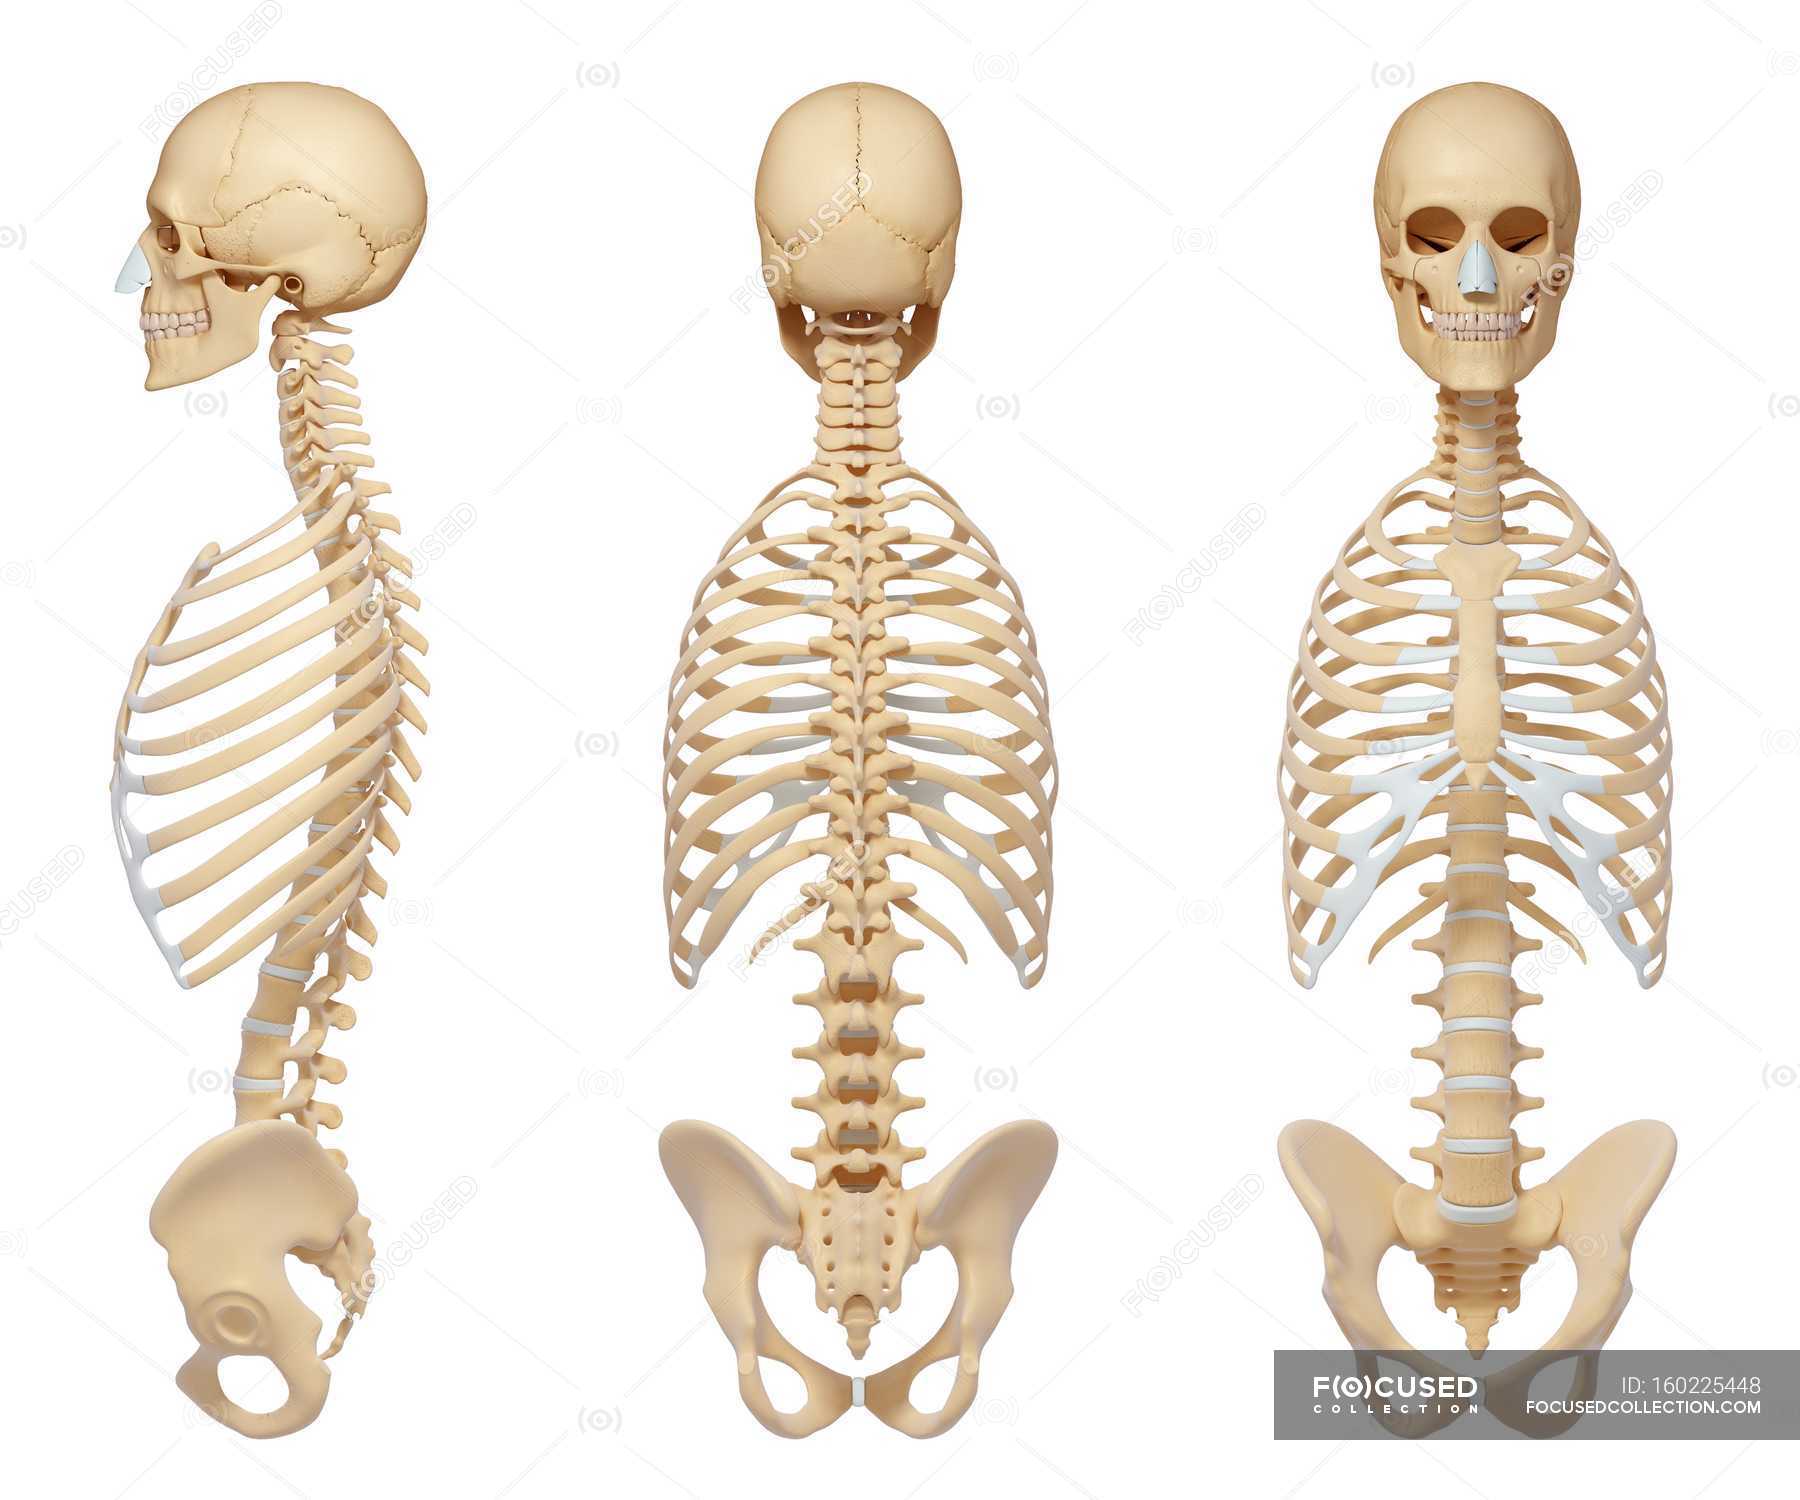 Normal Rib Cage Anatomy Anatomical Reference Stock Photo 160225448